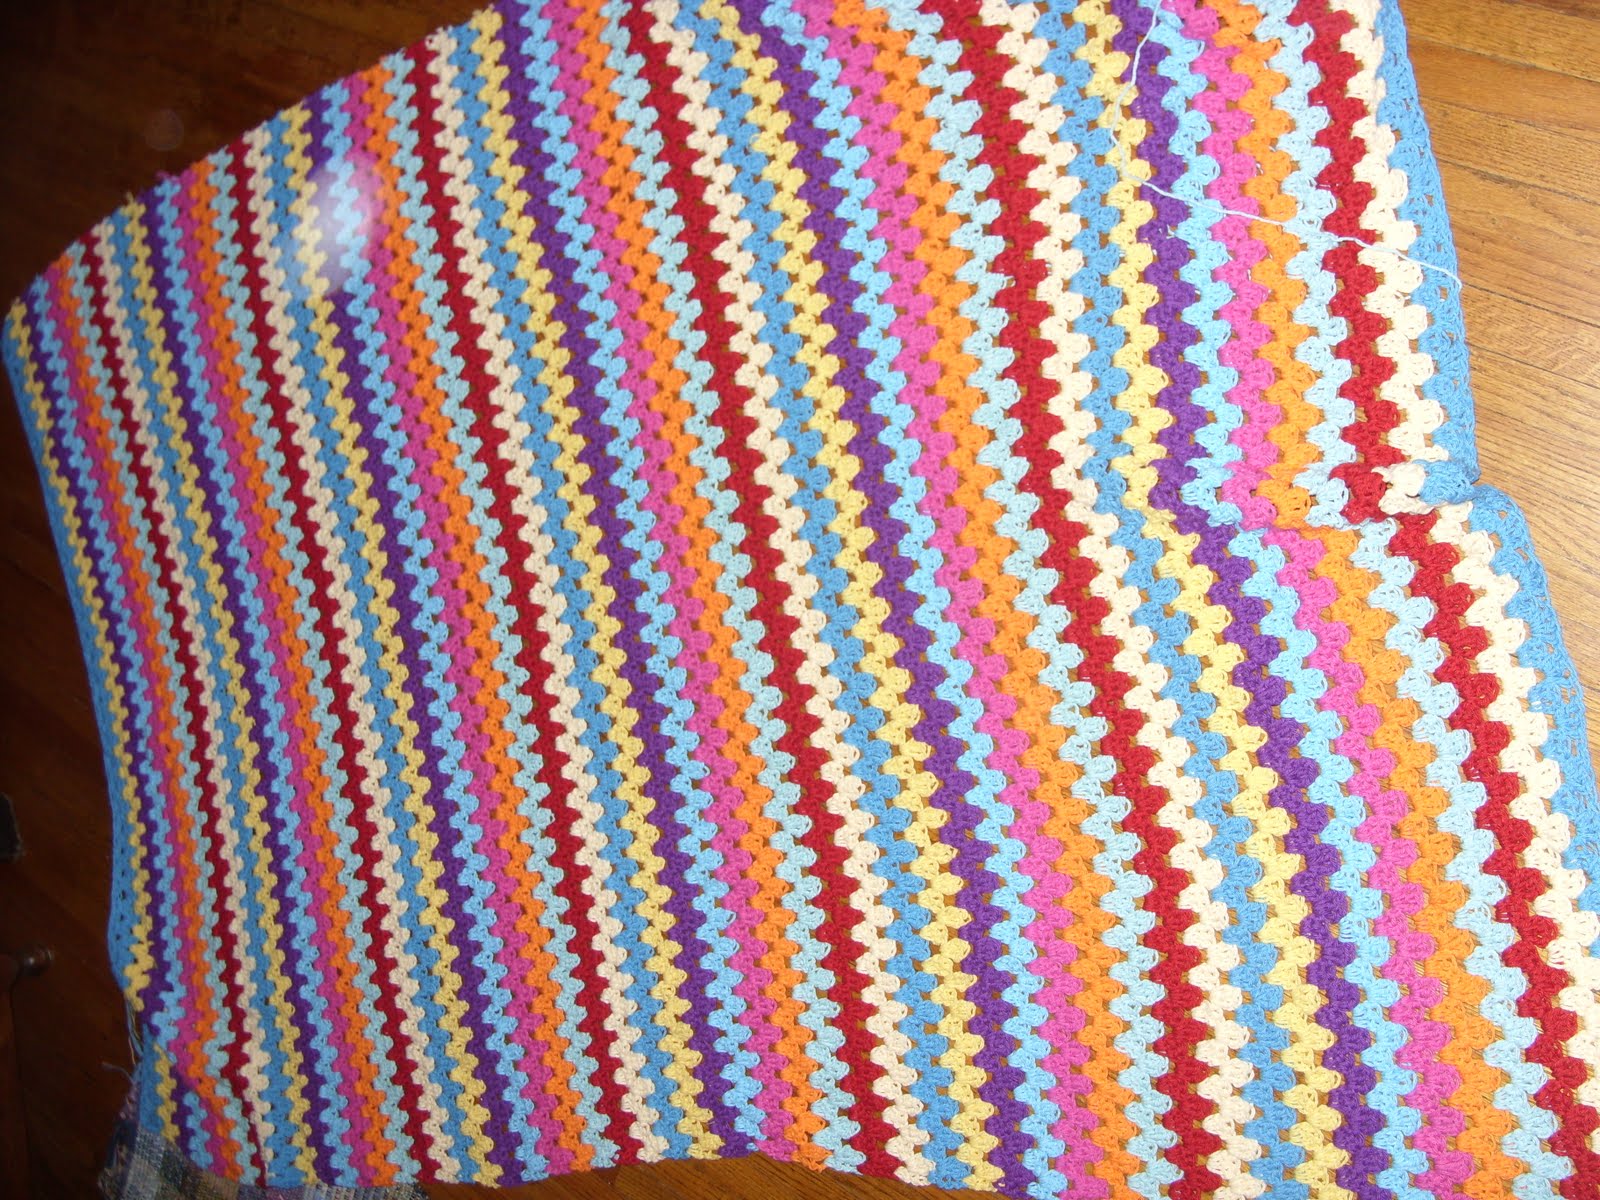 The Bee Lady from Hilltop Farm: Granny Stripe Blanket